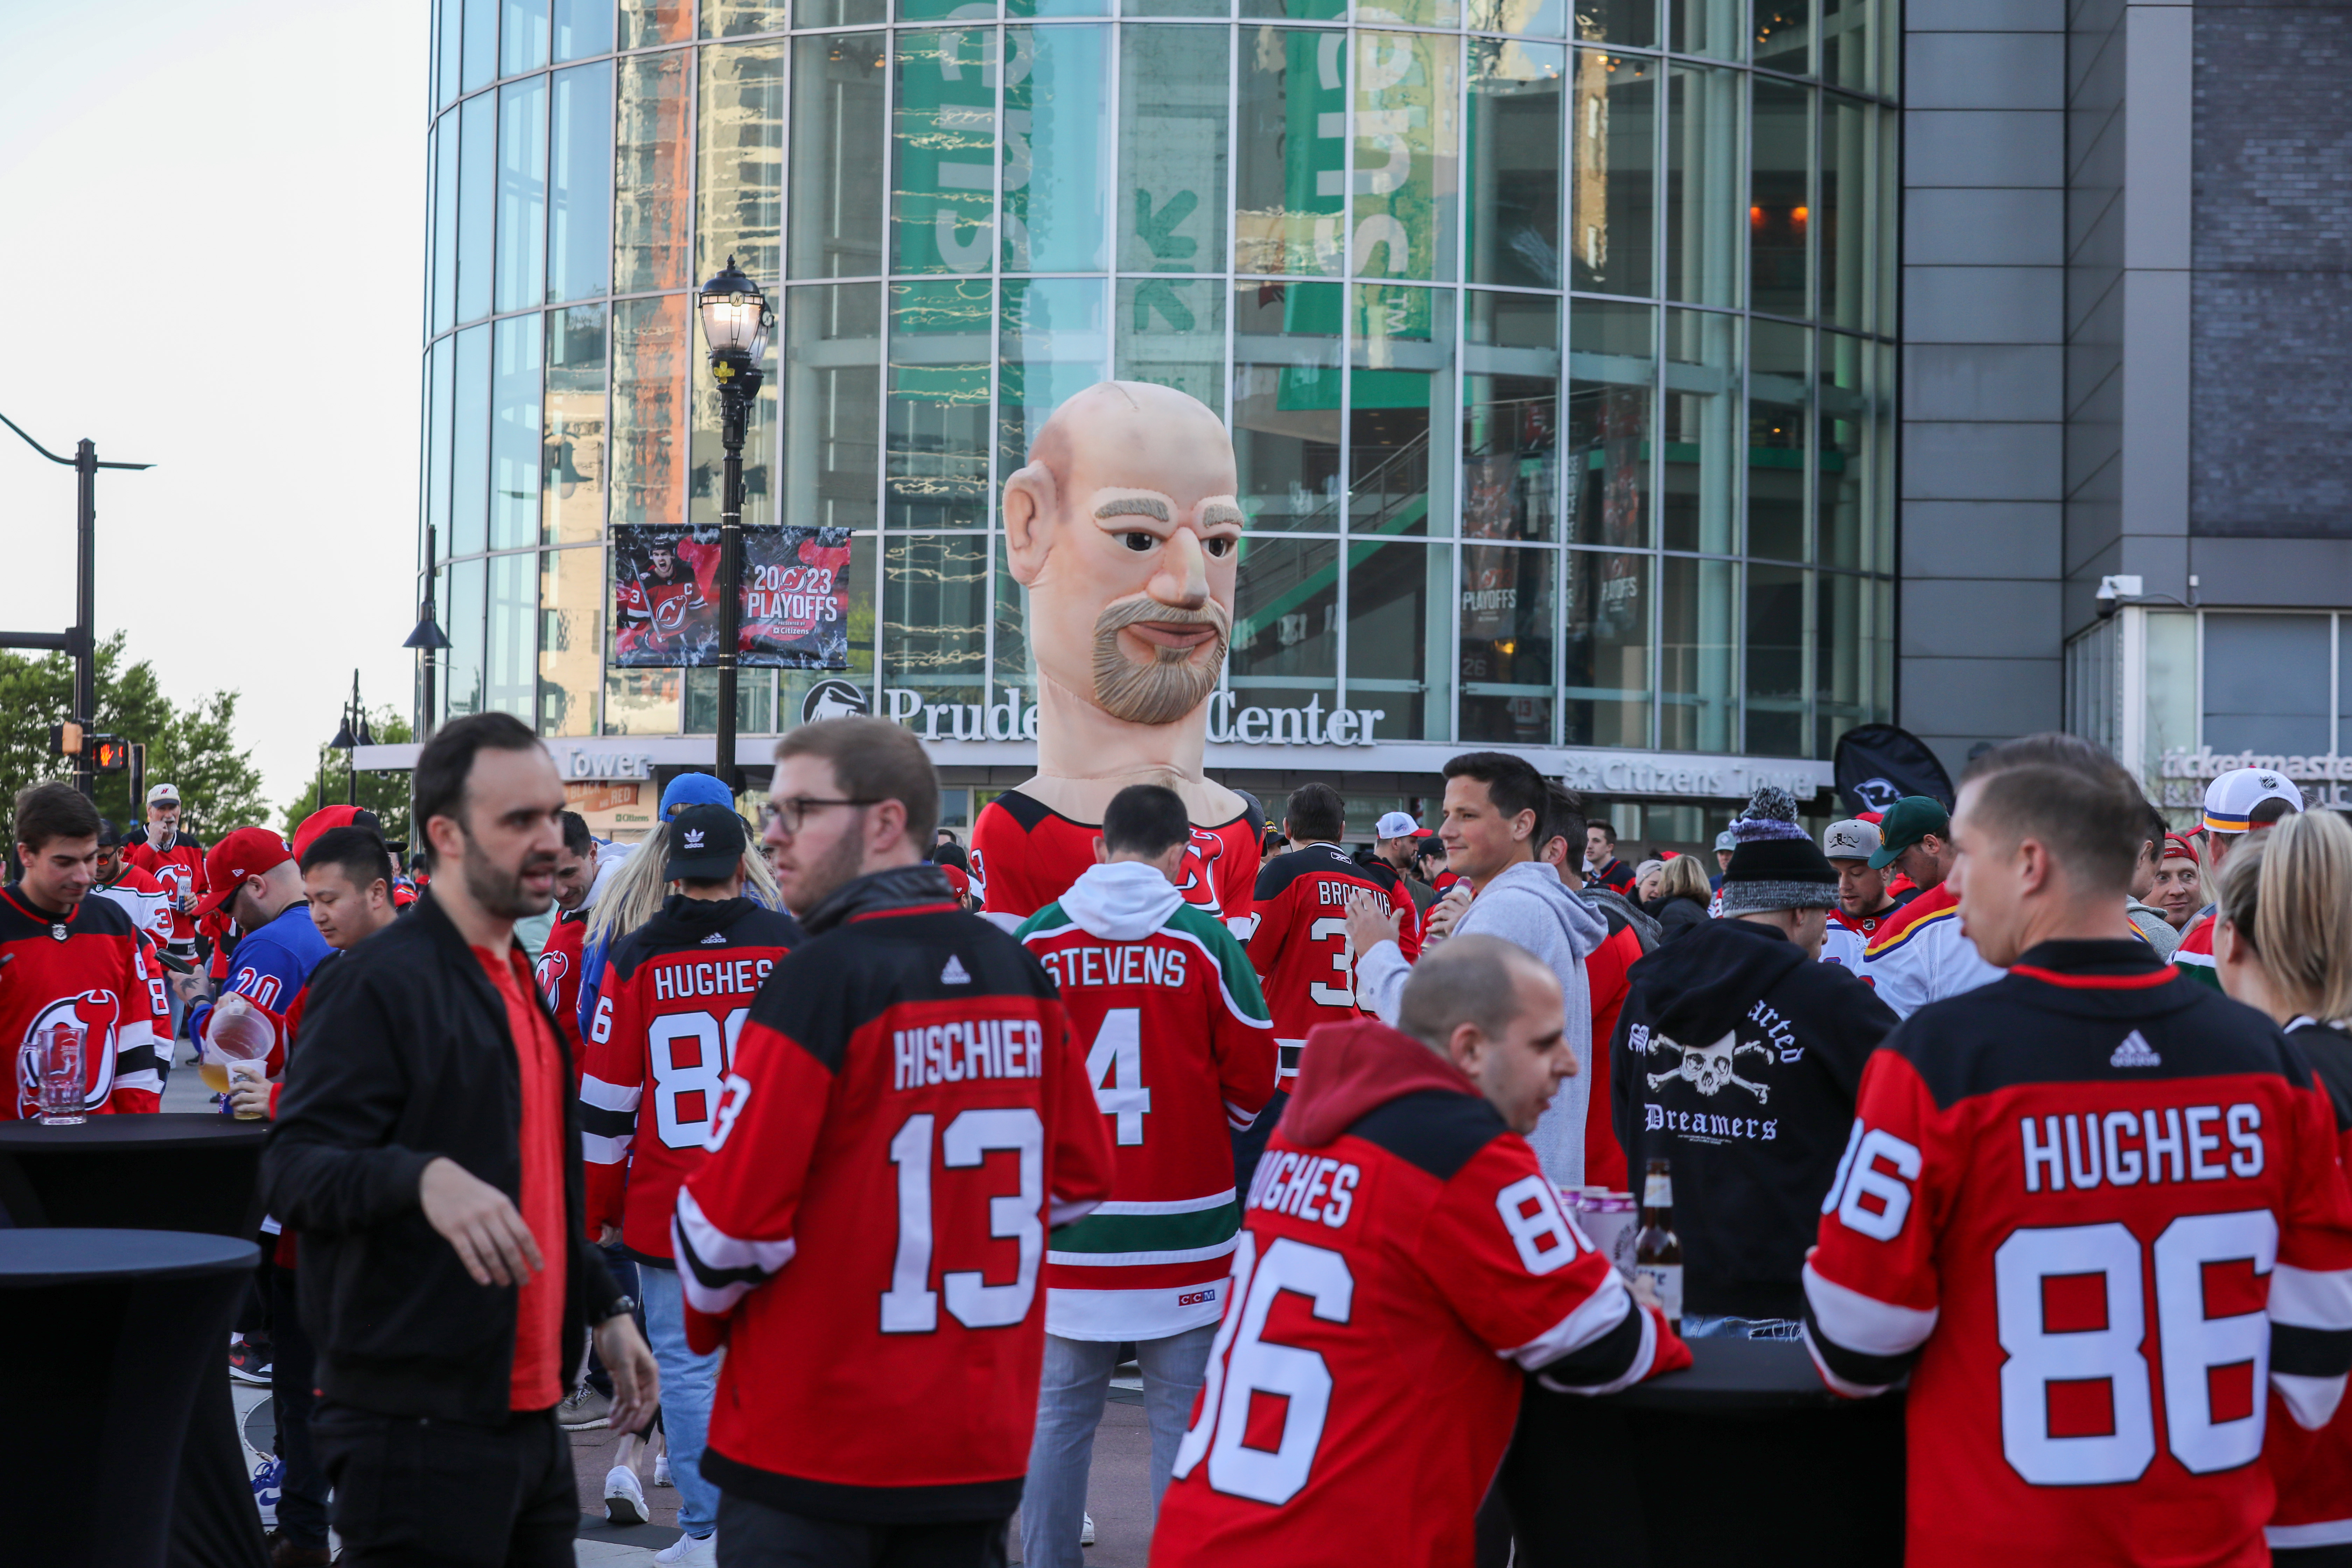 A giant likeness of former New Jersey Devils defenseman Ken Daneyko outside Prudential Center on Tuesday, April 18, 2023 in Newark, N.J. The Devils lost to the New York Rangers, 5-1, in Game 1 of the NHL Stanley Cup playoffs.